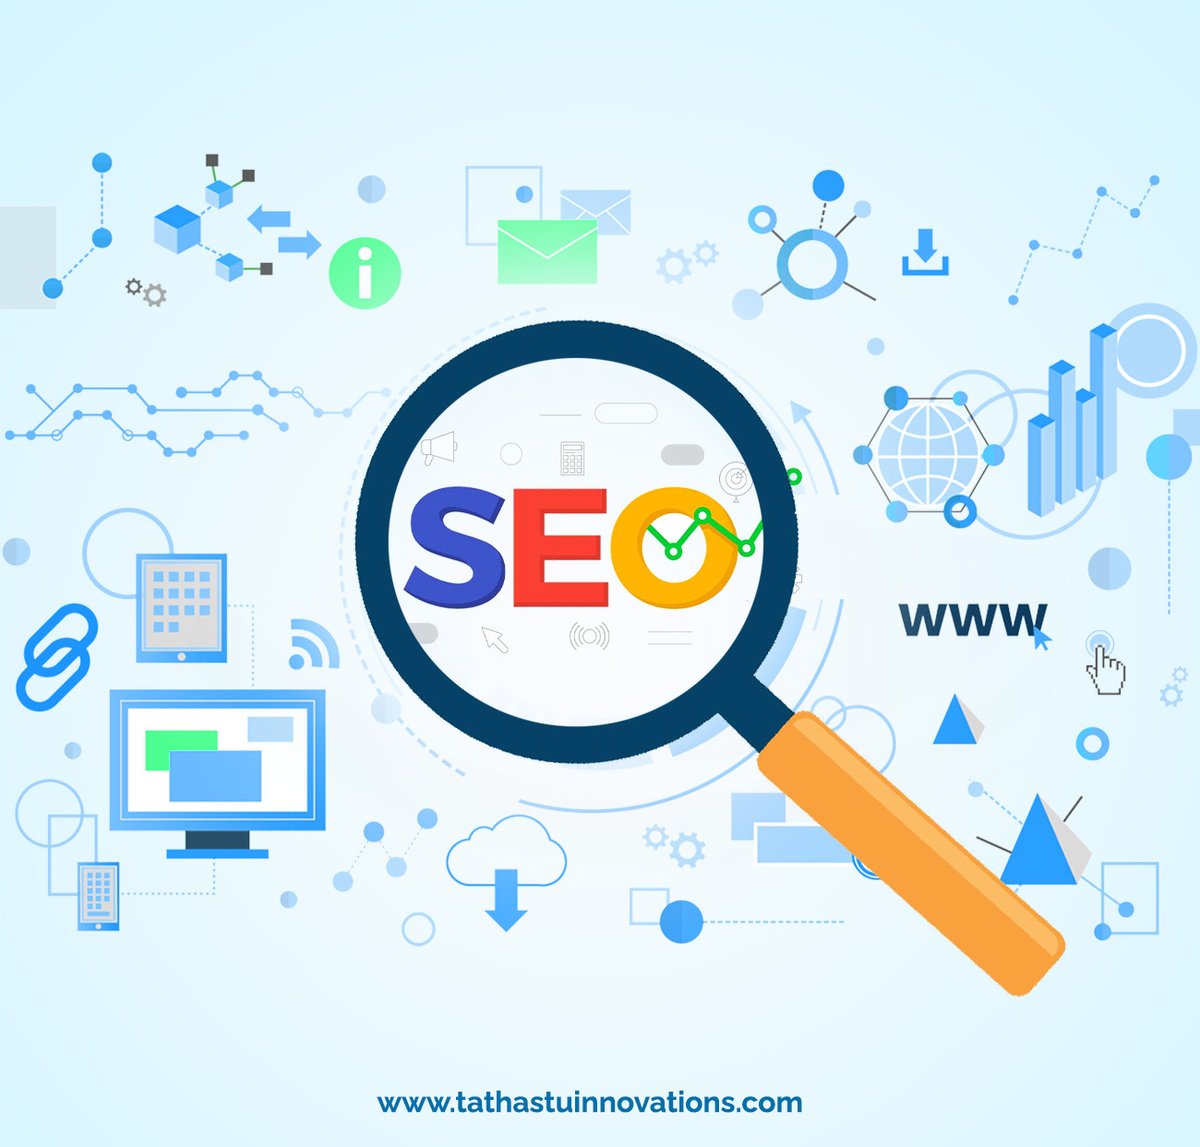 Unleash SEO's power, soar higher! 🚀🔍 Targeted traffic, online visibility, top rankings, connect with the right audience. Dominate digitally! #SEOMastery #BoostYourVisibility

Visit us:🌐tathastuinnovations.com 
📞+91 90348 89088